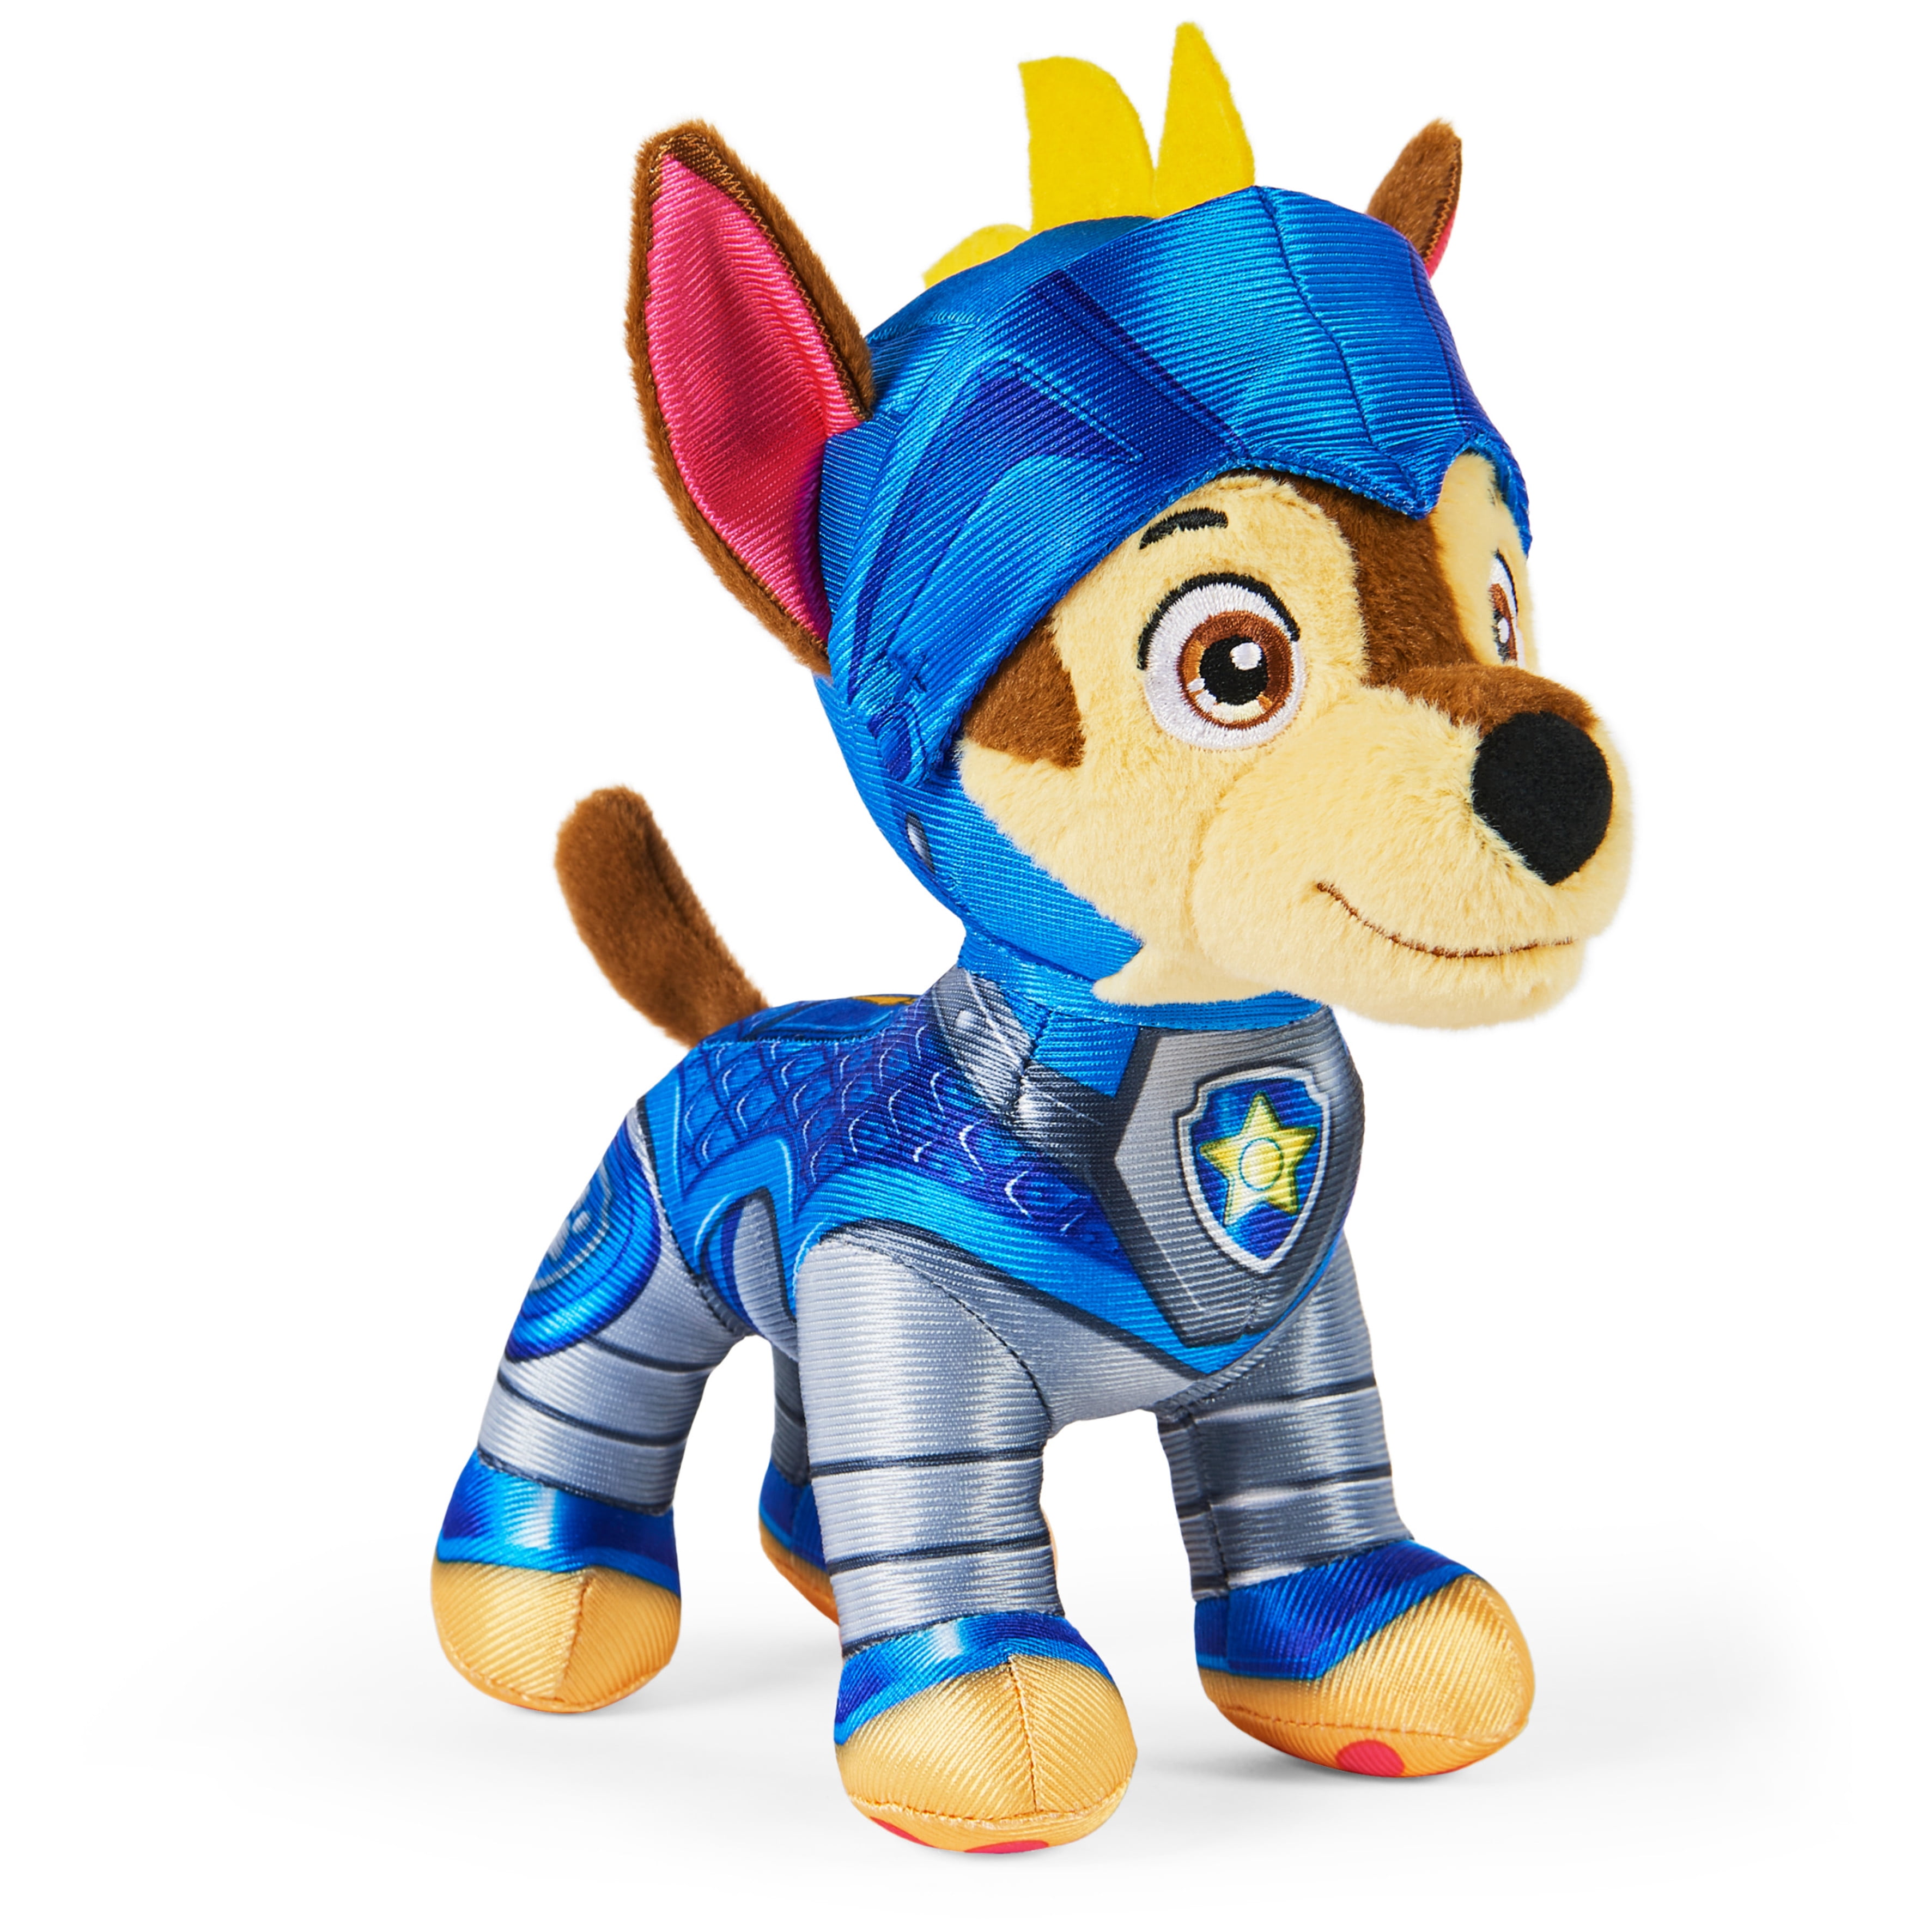 add 2 to cart Paw Patrol 8" Plush Pup Pals---Authentic!!! Buy 1 Get 1 25% OFF